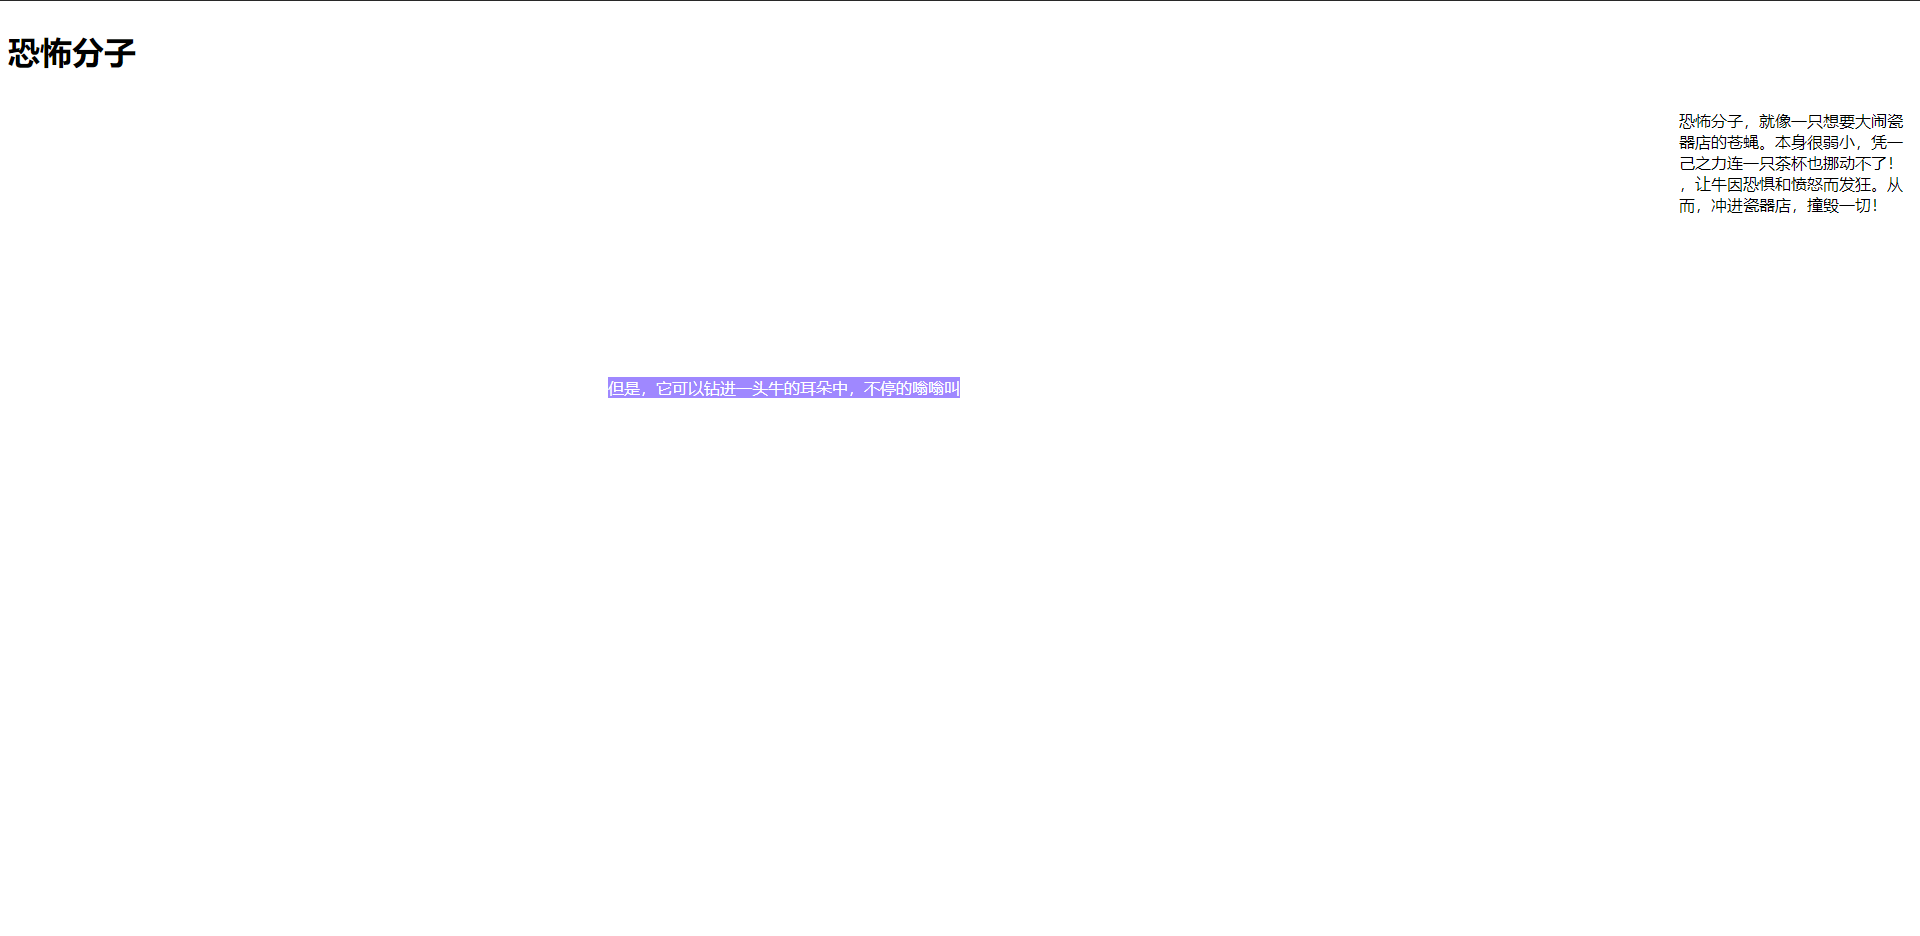 Snipaste_2020-08-15_13-44-34.png